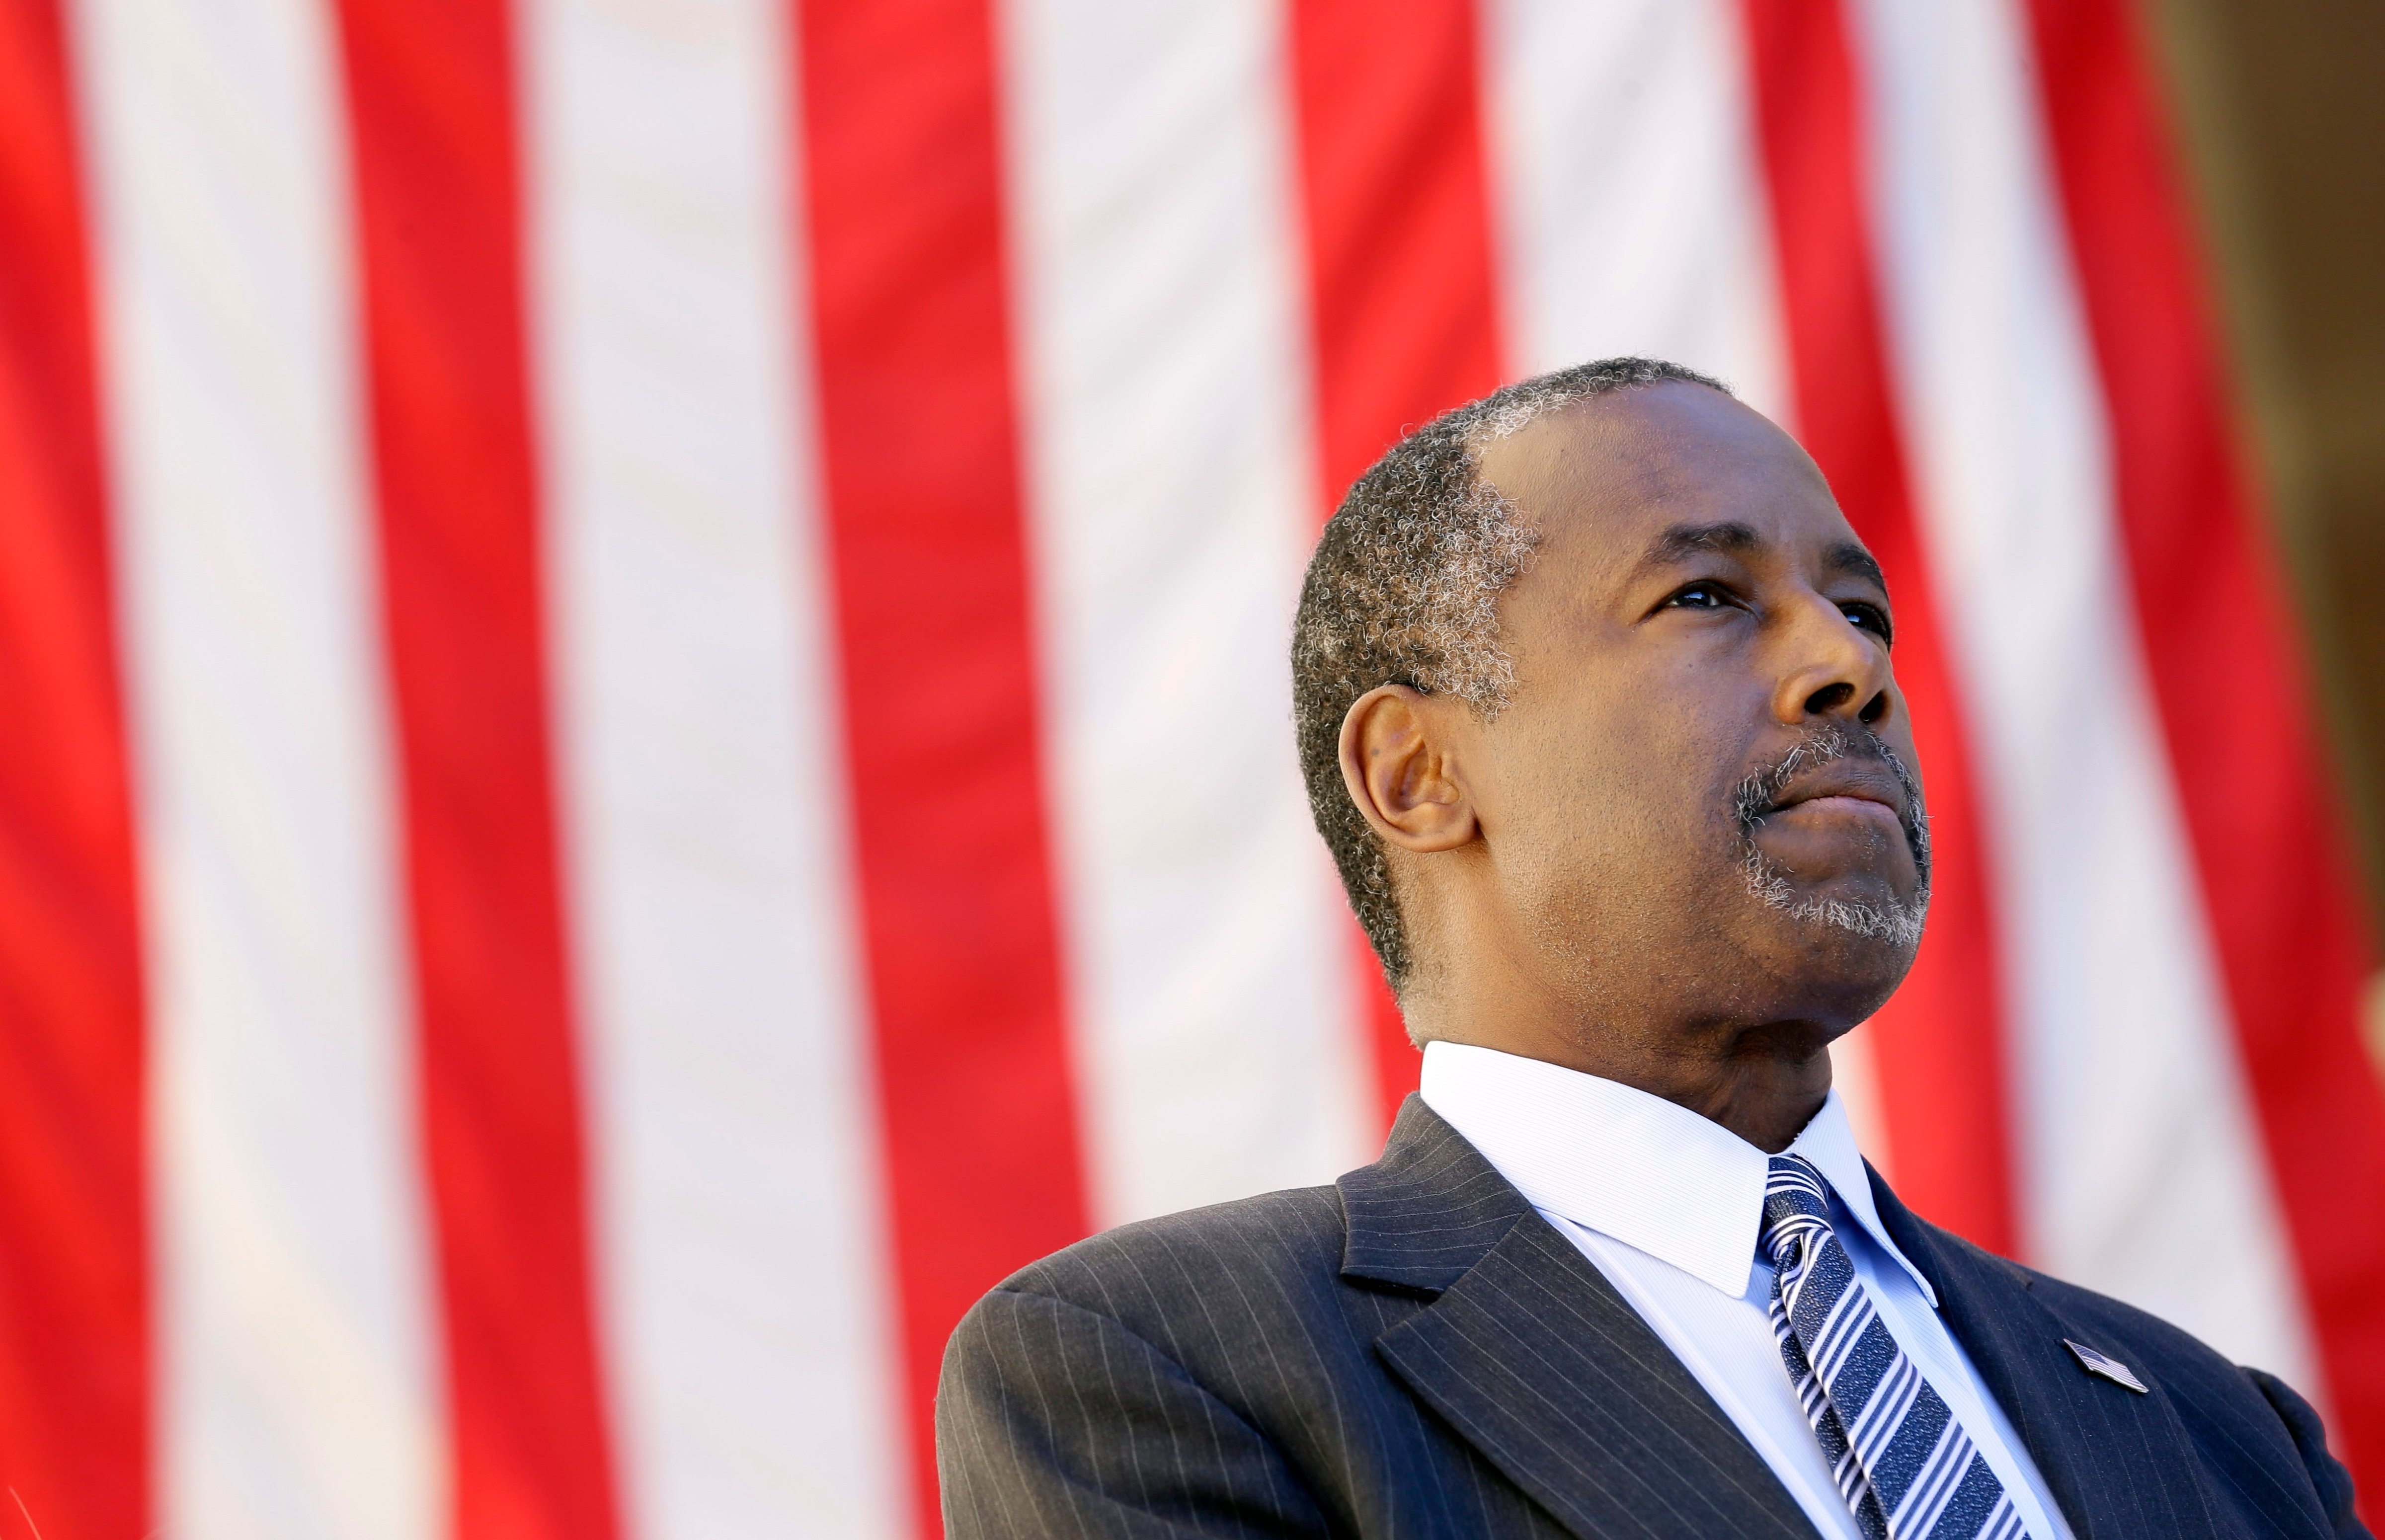 Ben Carson looks on as he is introduced to speak at a town hall meeting, on Oct. 2, 2015, in Ankeny, IA. (Charlie Neibergall—AP)